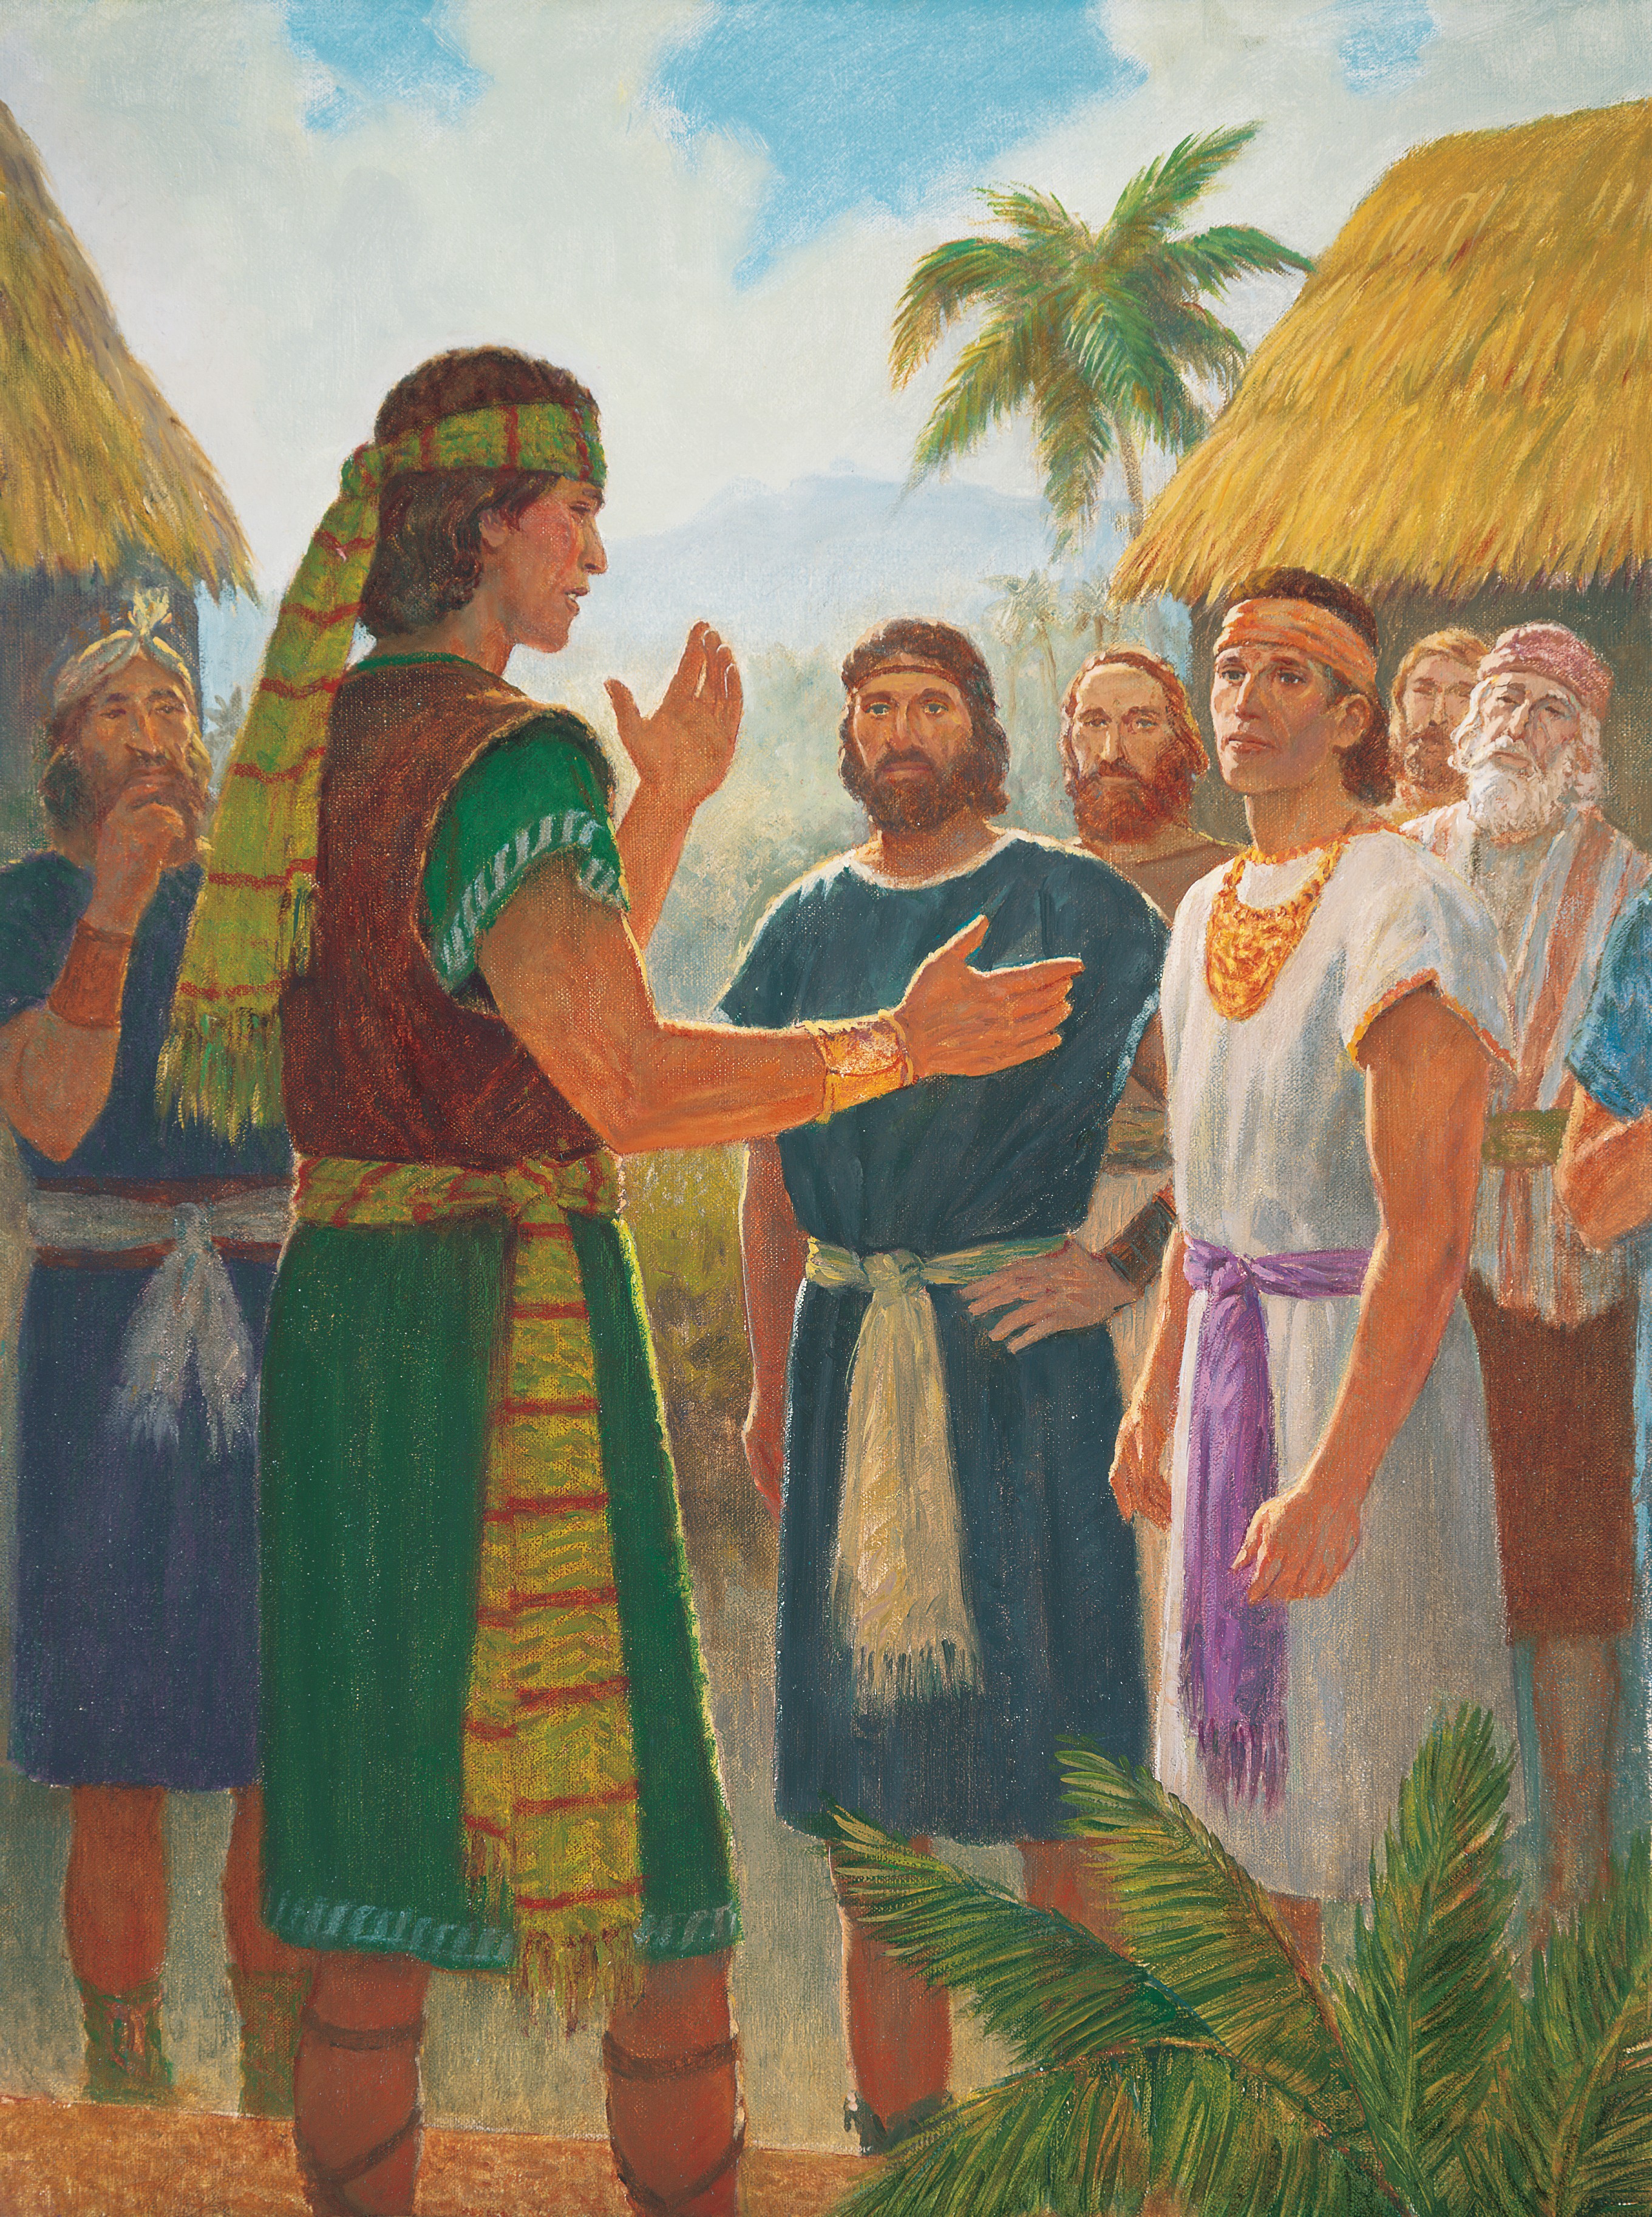 An oil painting by Gary L. Kapp showing Alma the Younger testifying to a group of men about his experiences and repentance.